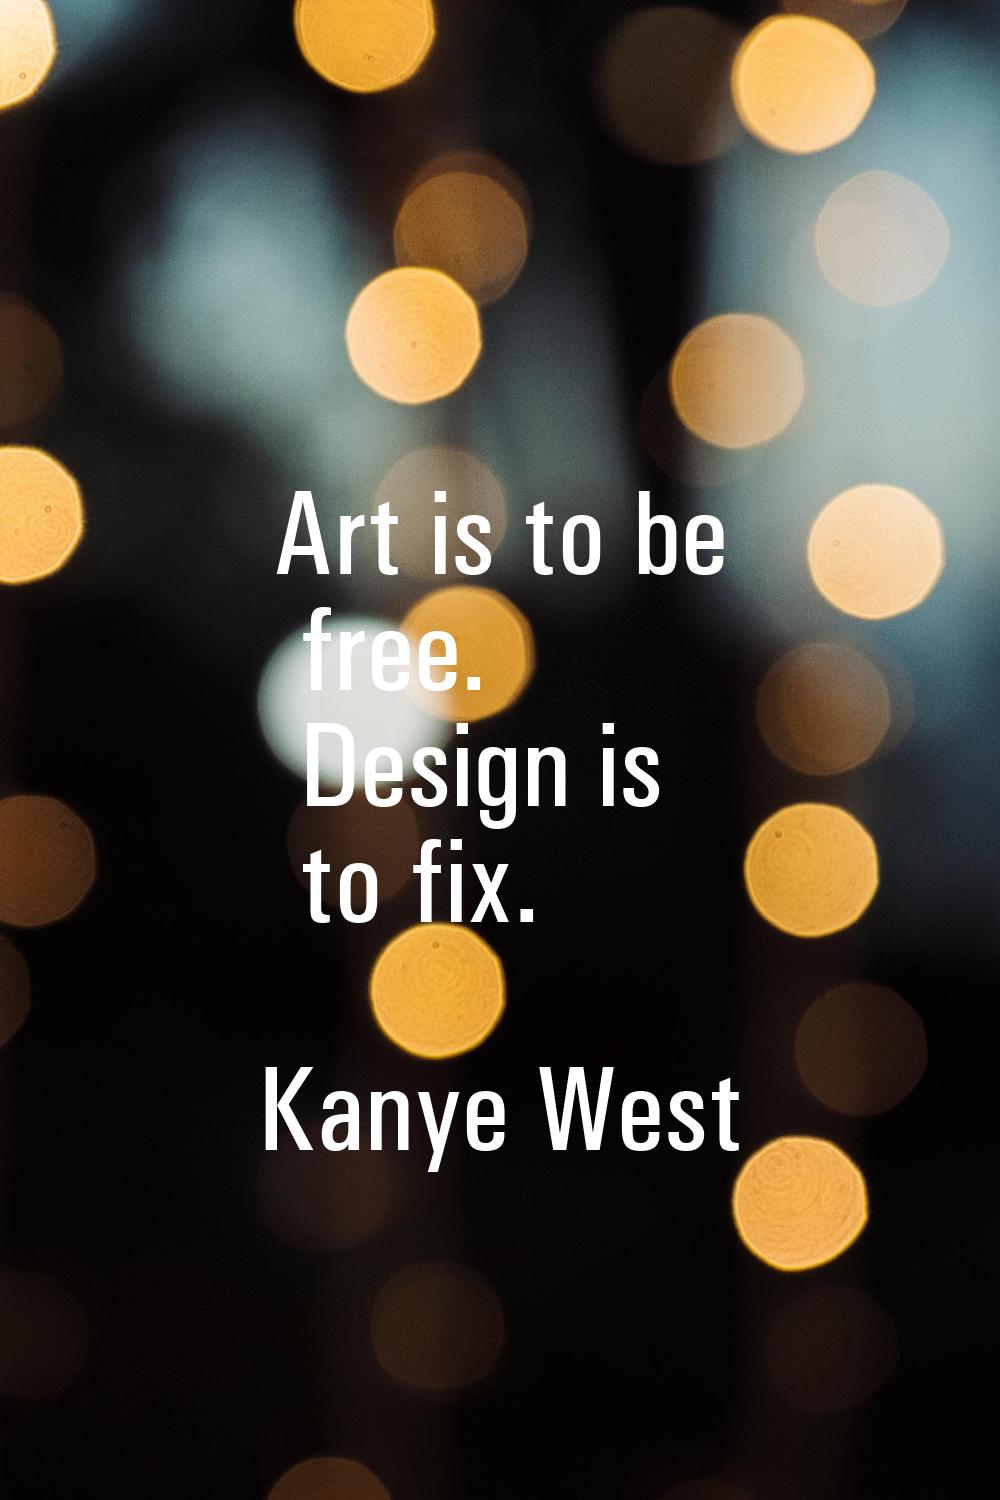 Art is to be free. Design is to fix.